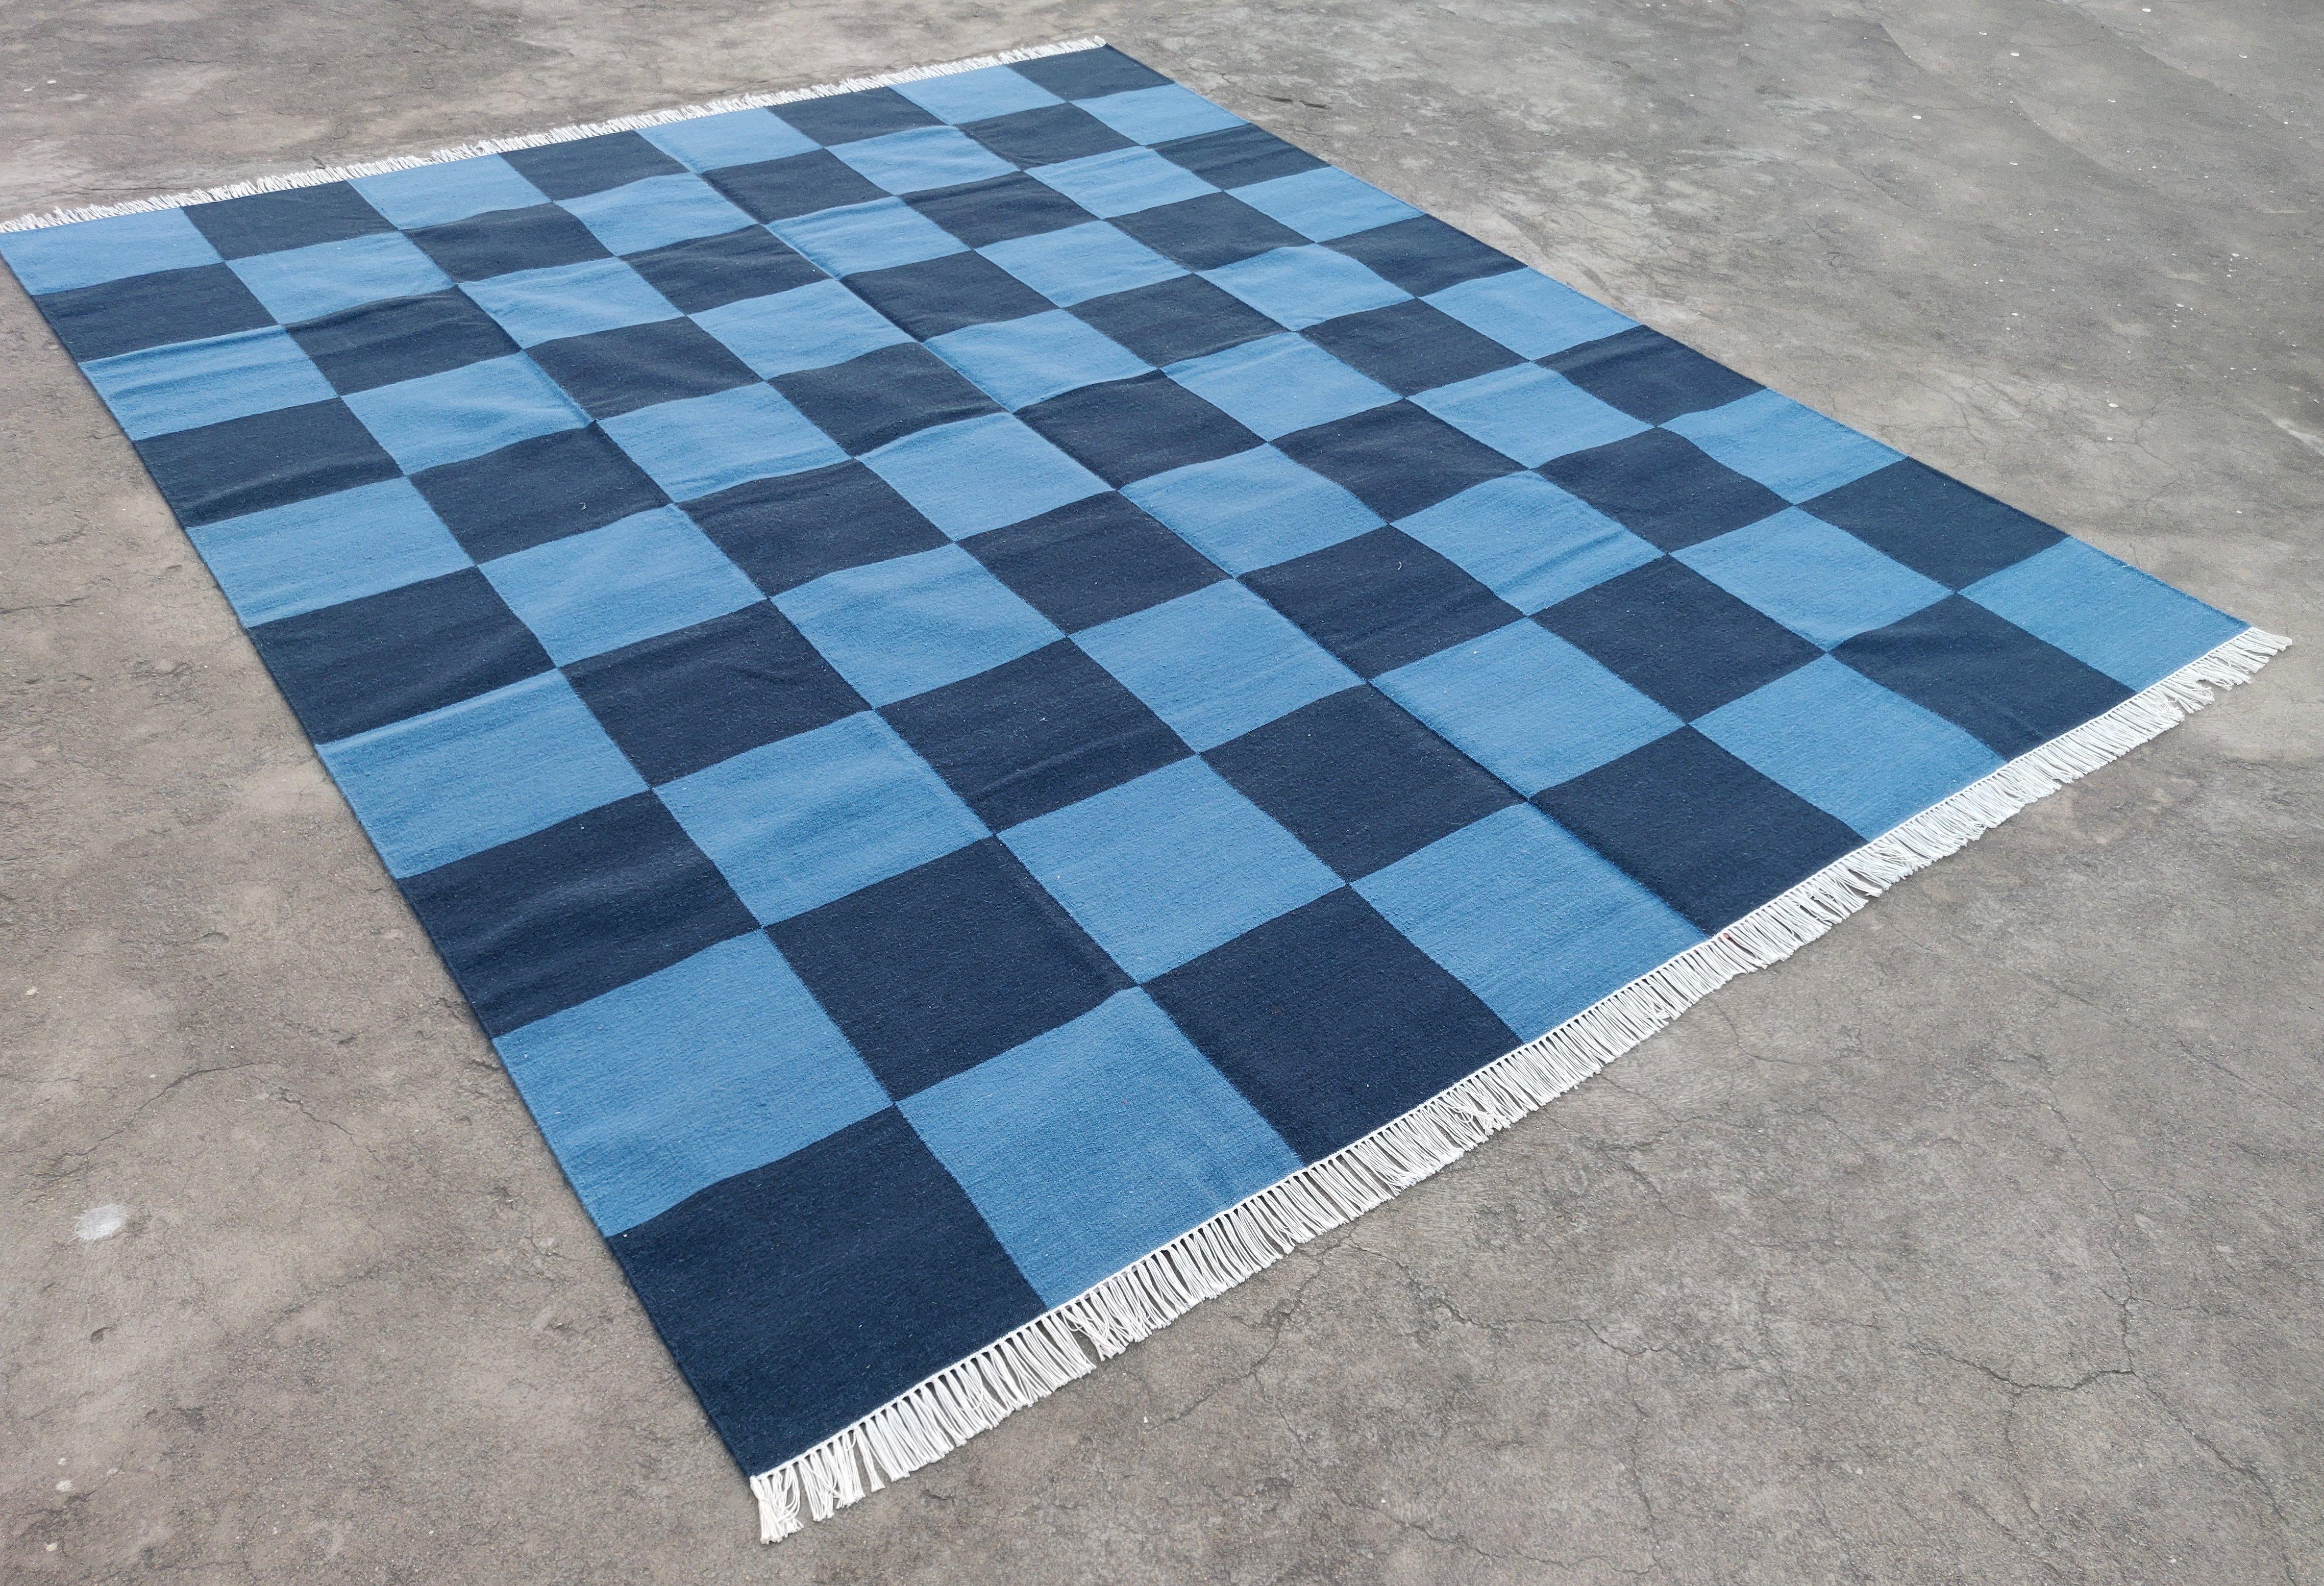 Woolen Vegetable Dyed Reversible Sky Blue And Indigo Blue Indian Tile Checked Rug - 8'x10'
These special flat-weave dhurries are hand-woven with 15 ply 100% cotton yarn. Due to the special manufacturing techniques used to create our rugs, the size